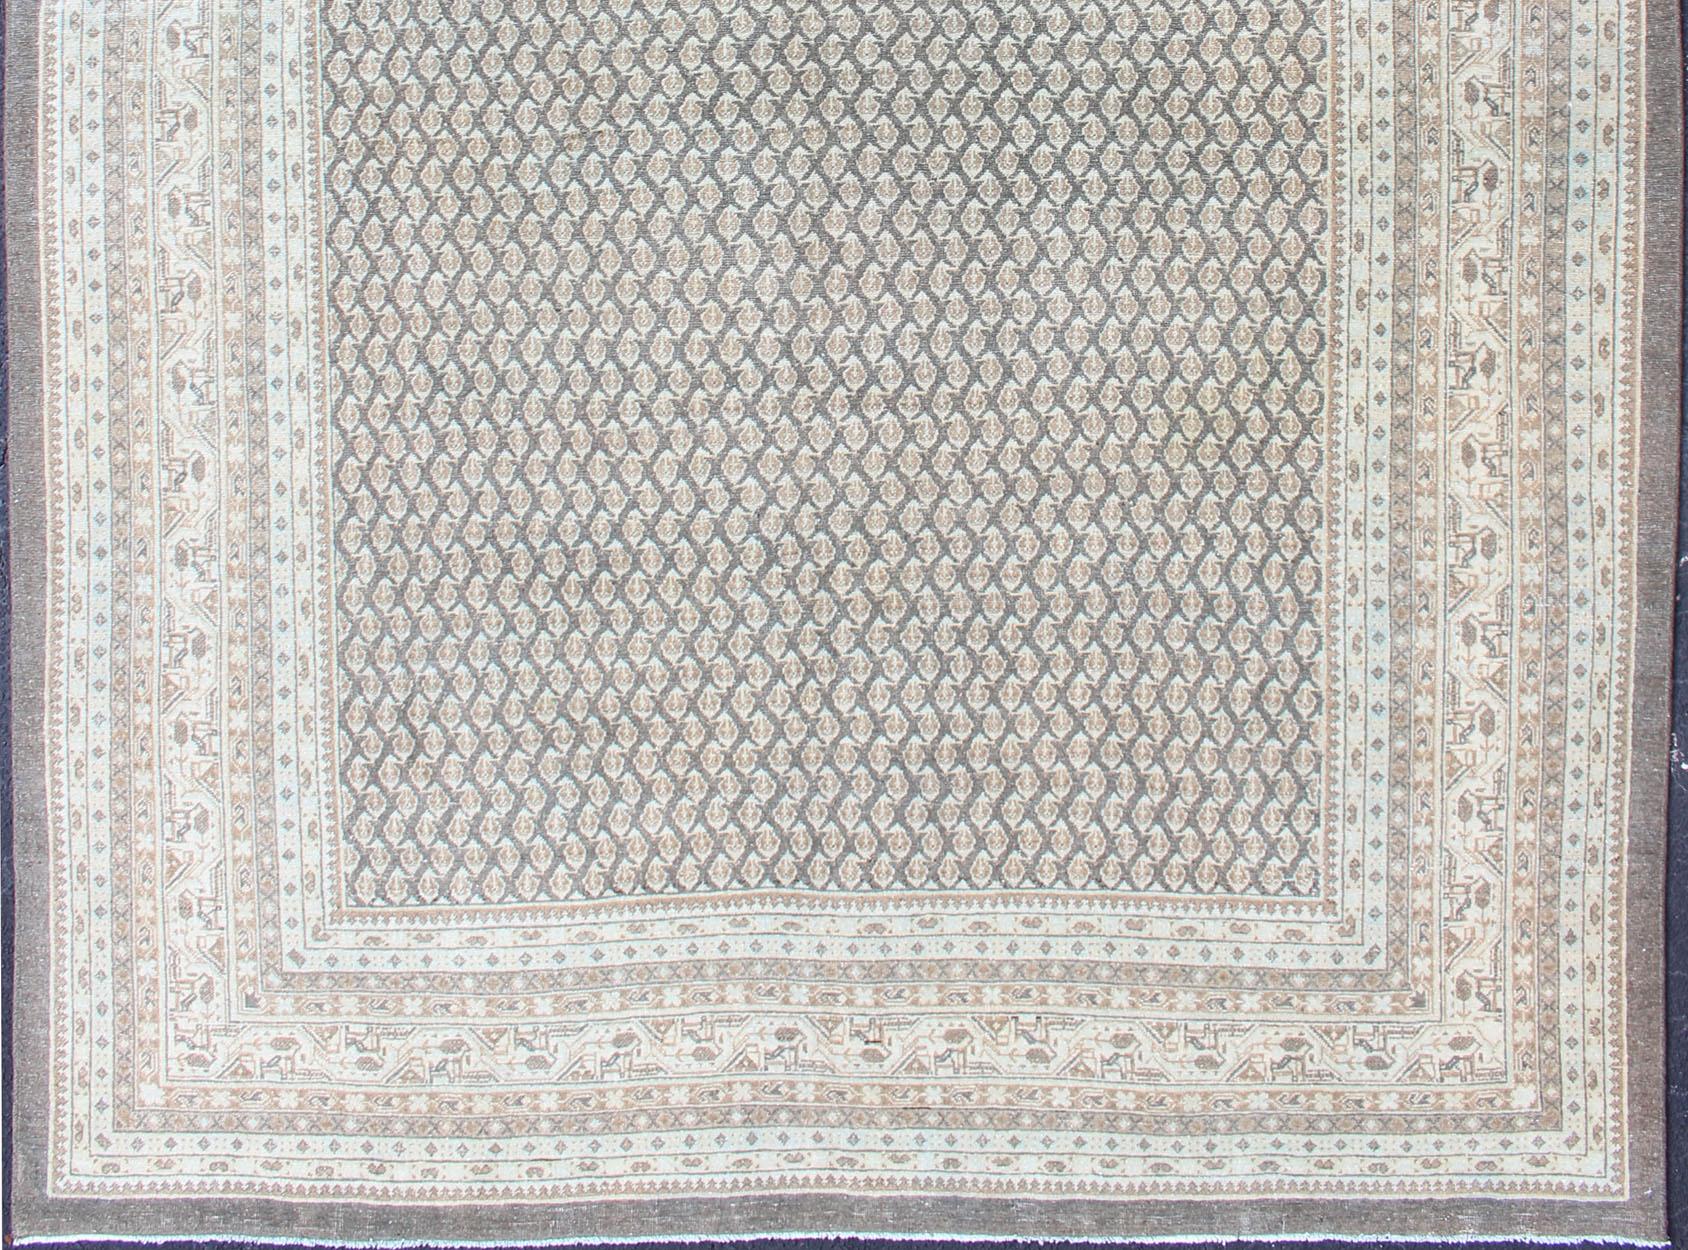 Gray background Tabriz Antique rug from Persia with Repeating Geometric design, rug SUS-2009-822, country of origin / type: Iran / Tabriz, circa 1940

This antique Persian Tabriz carpet (circa mid20th century) features a refined palate of gray,